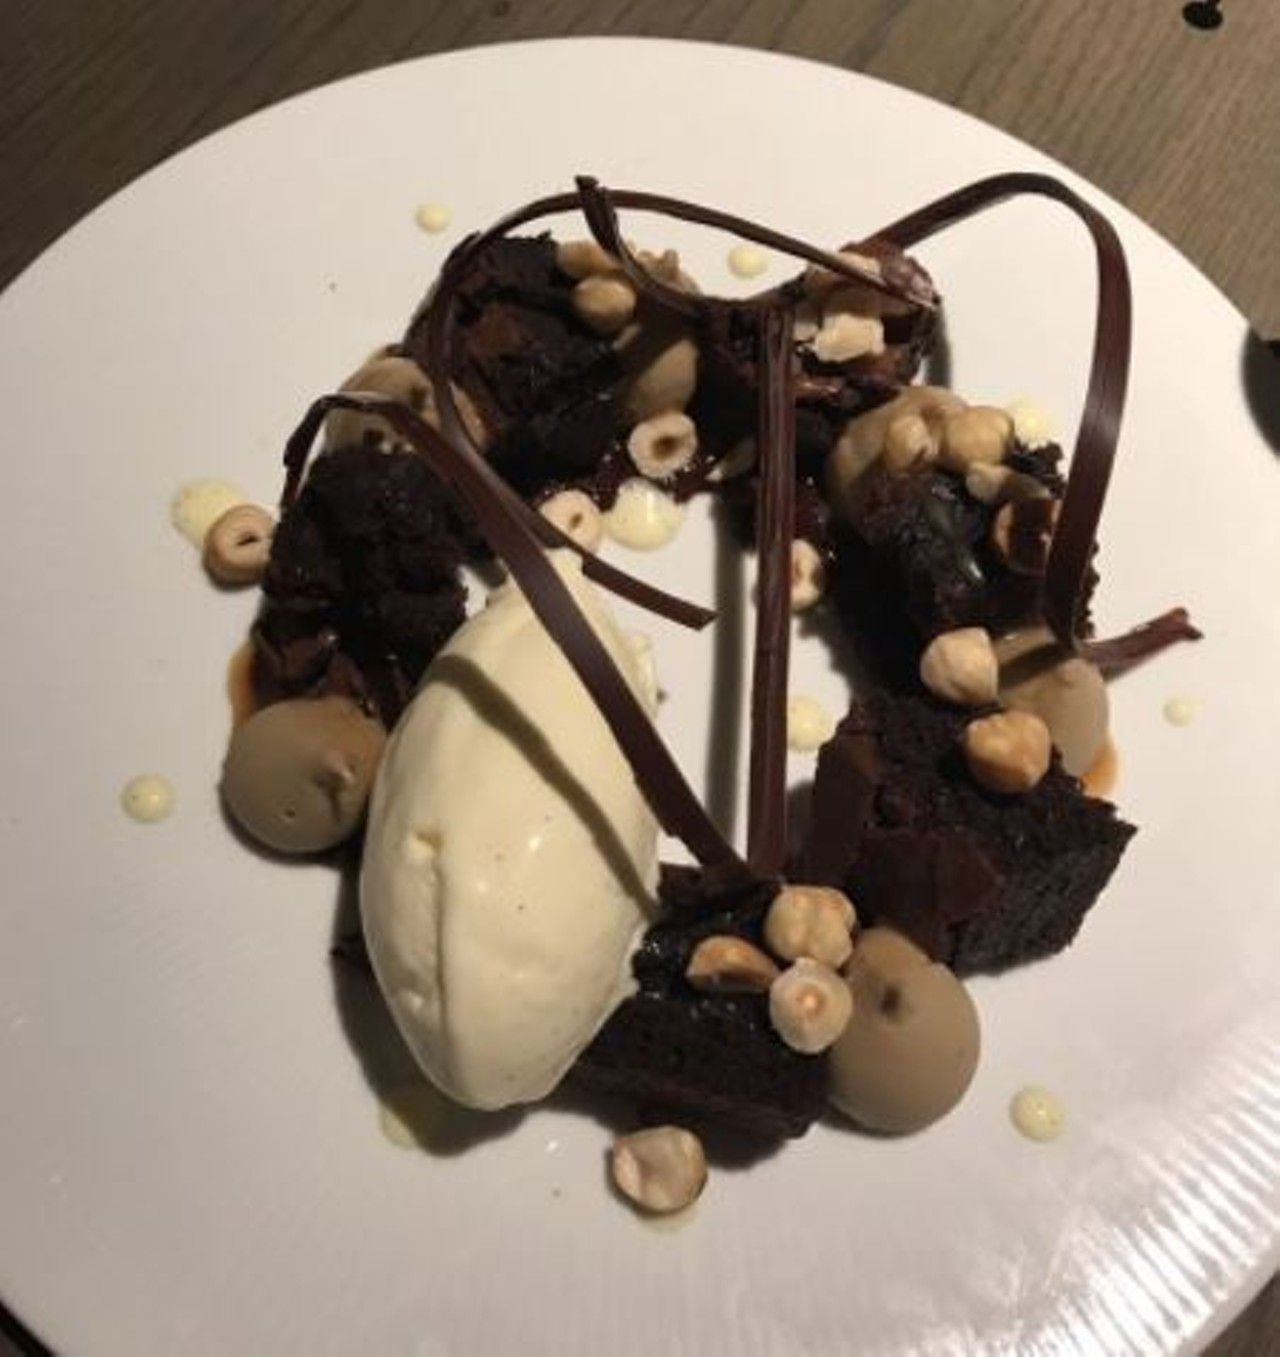 What to order - Dessert
The Hazelnut Brownie is pumped with presentation and served with espresso and vanilla bean ice cream.
Photo via Alissa J. 